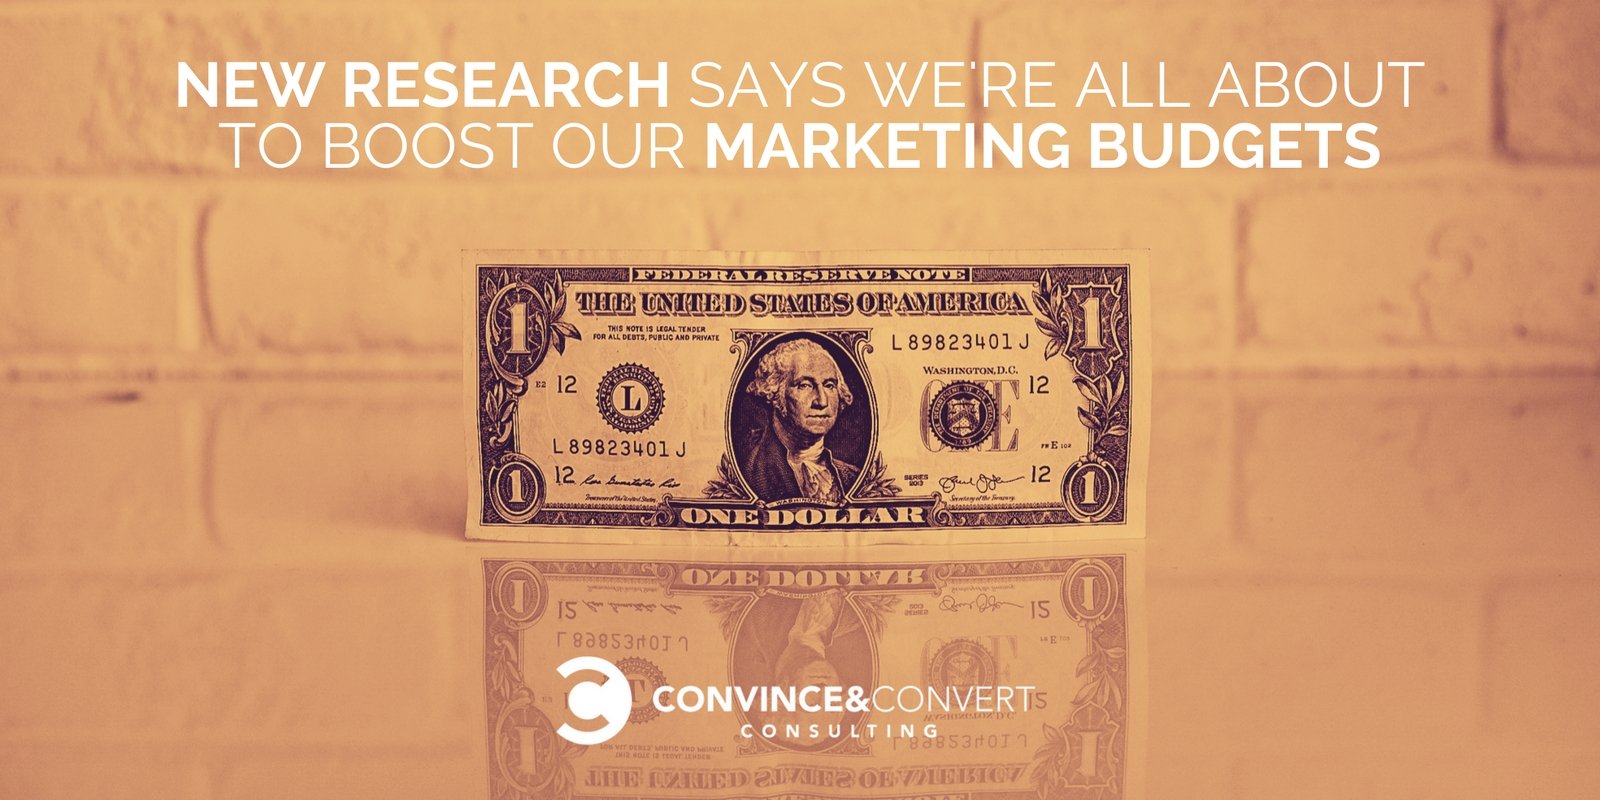 New Research Says We're All About to Boost Our Marketing Budgets